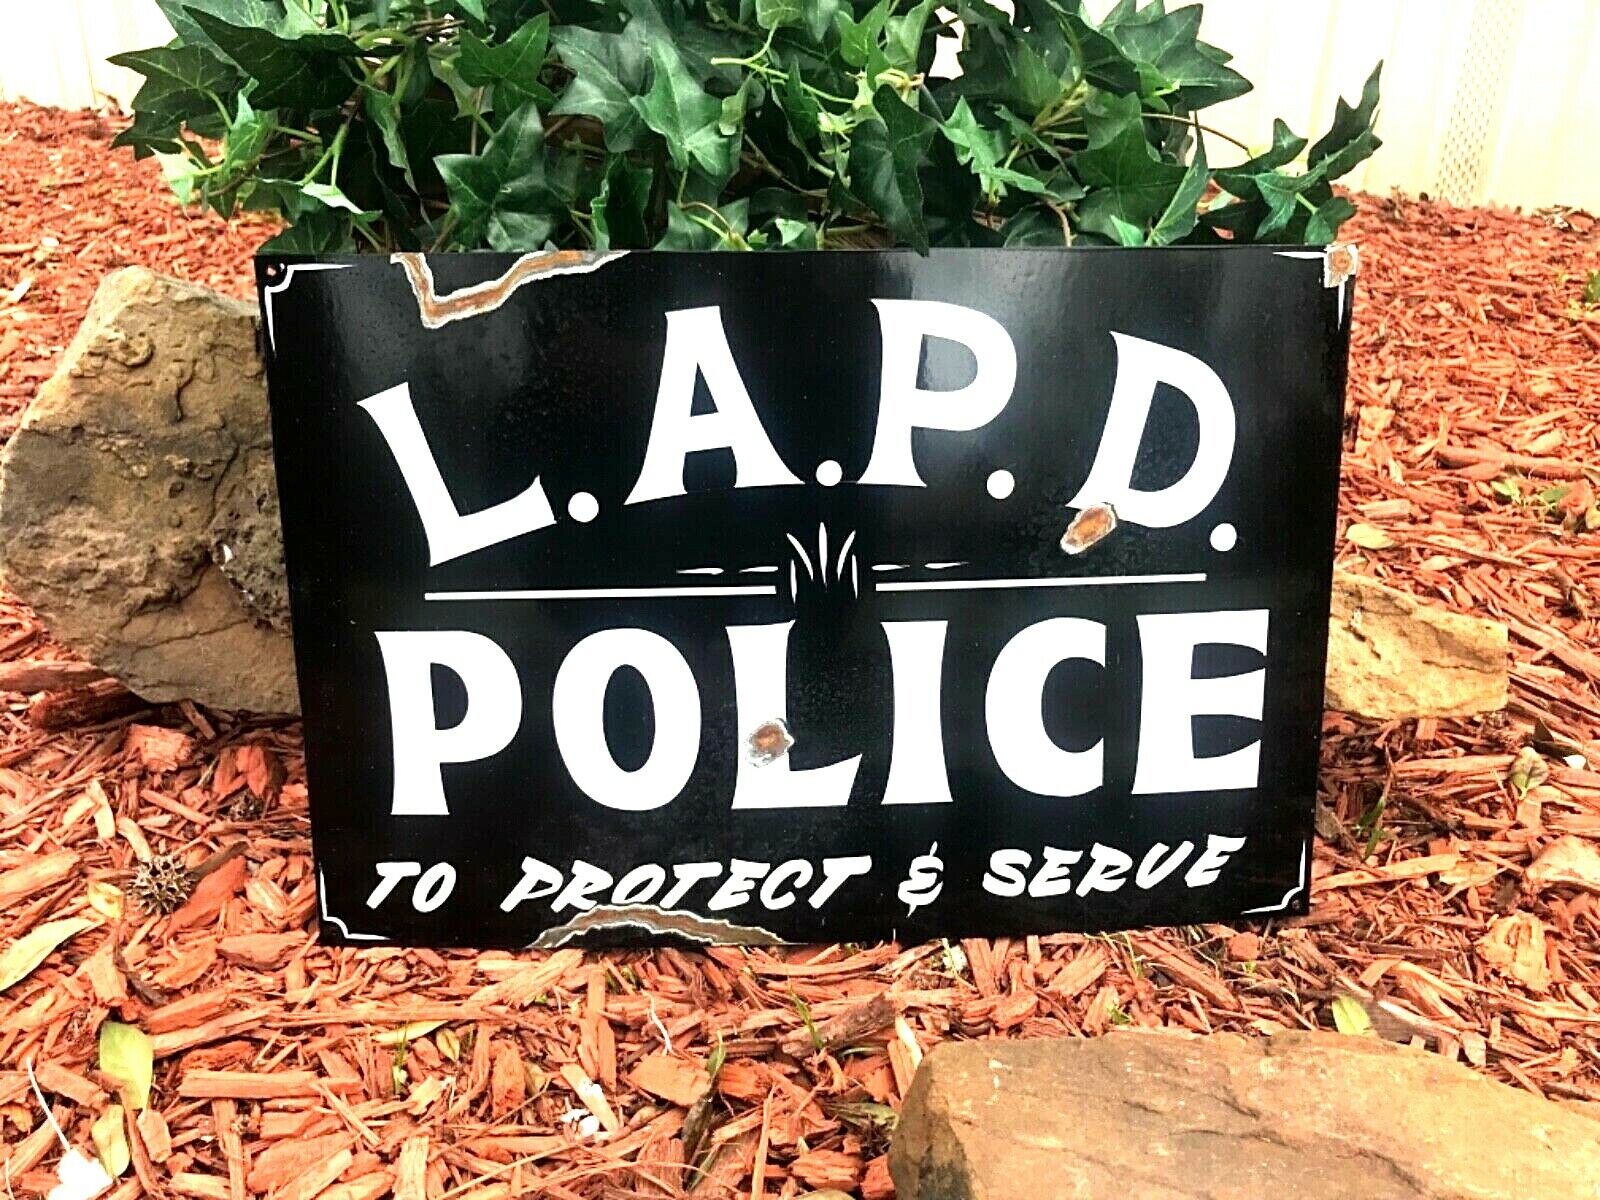 CUSTOM ORDER YOUR PERSONALIZED HAND PAINTED POLICE OFFICER DEPARTMENT Gift